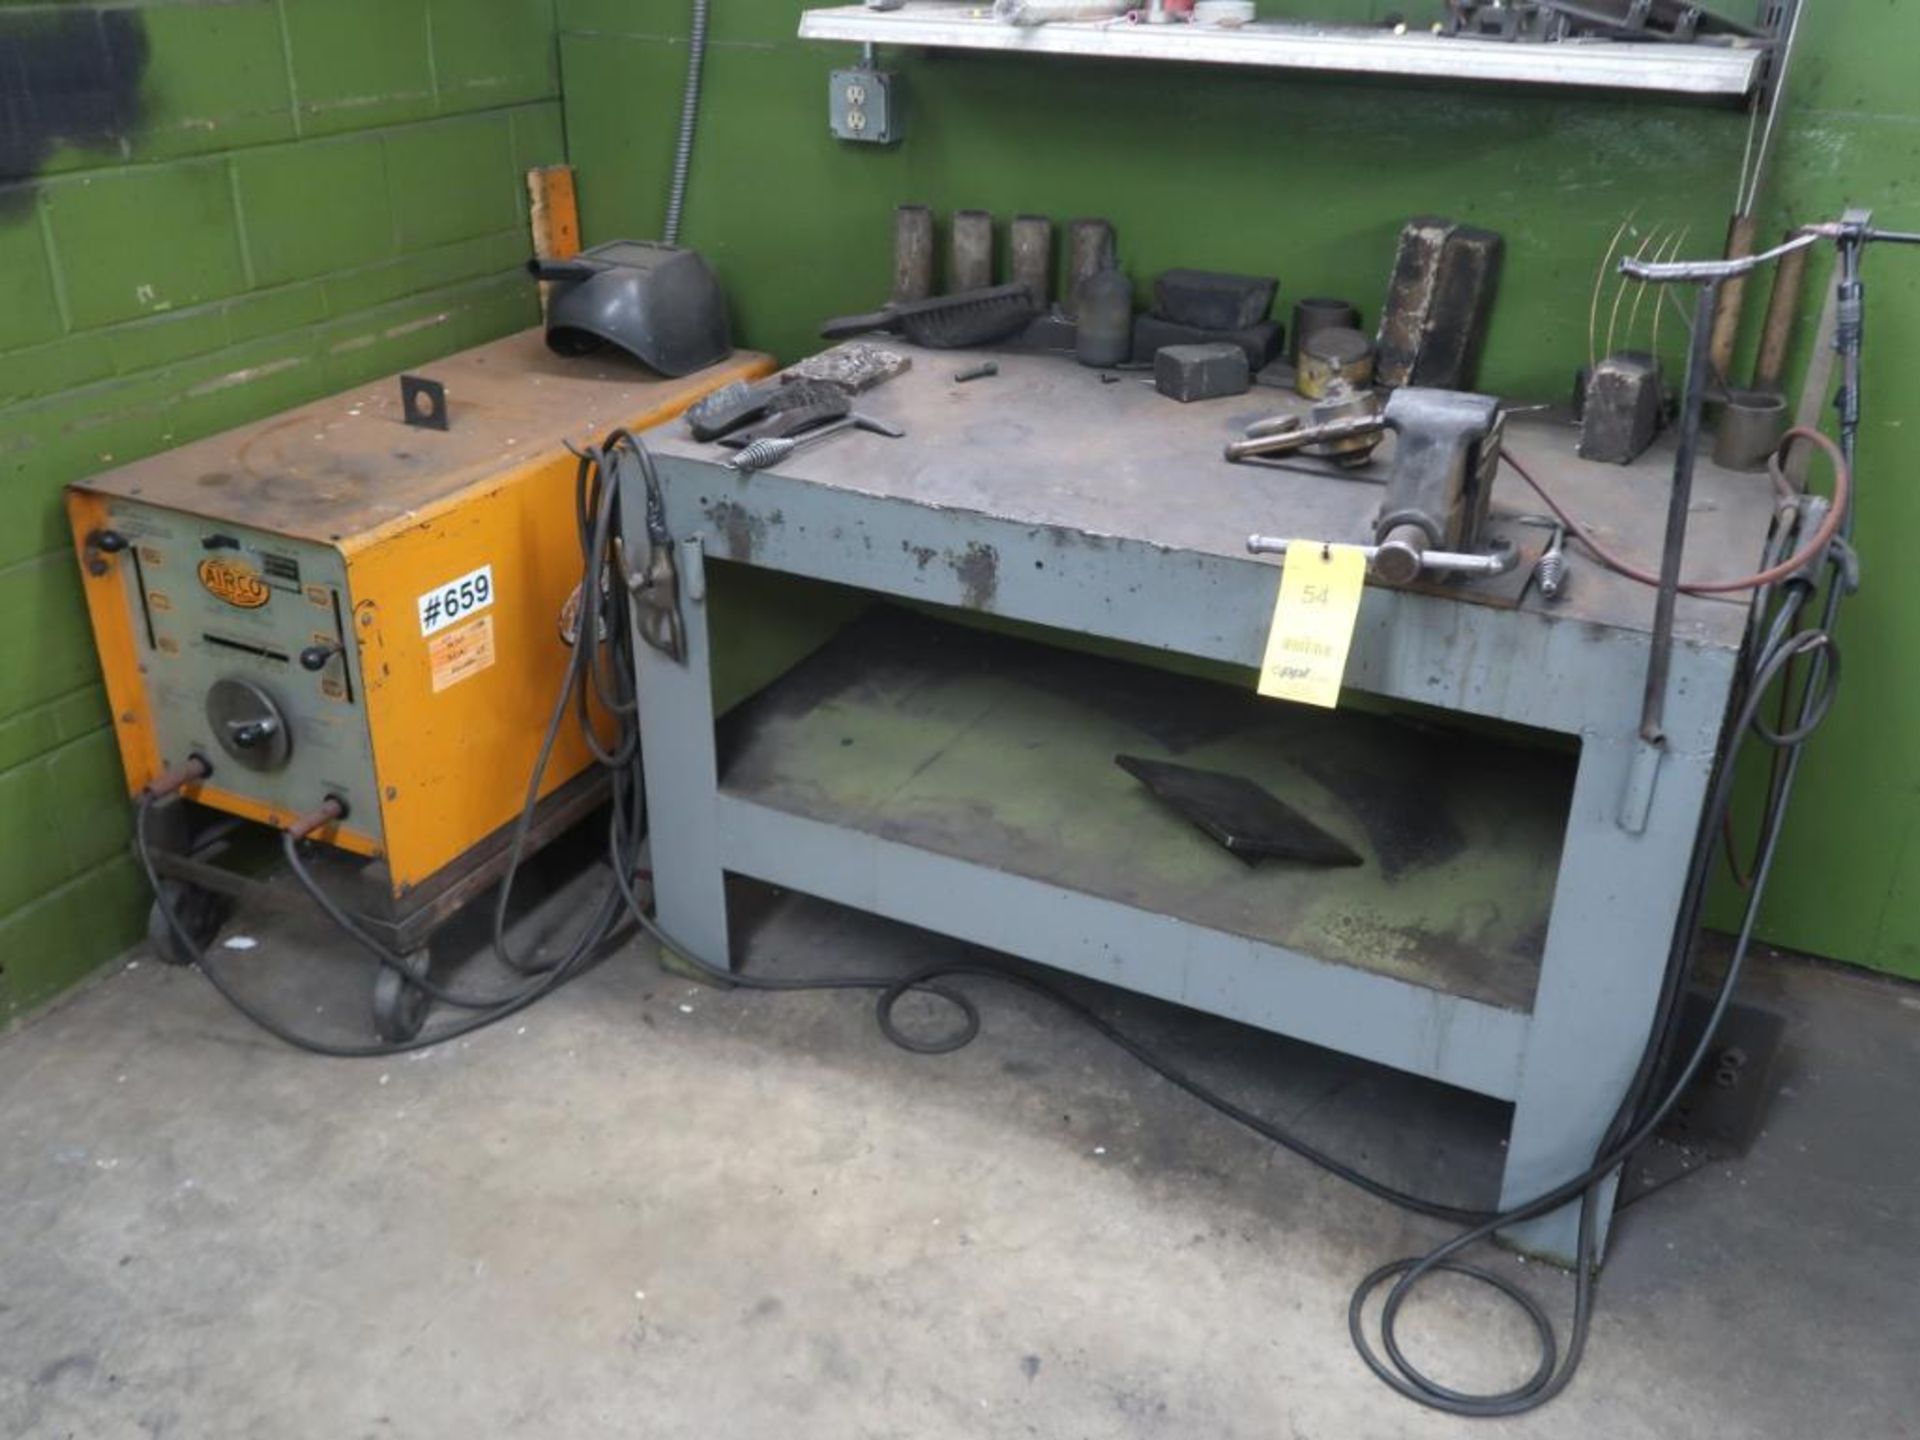 LOT: Airco 250 Amp Welder, Cables, TIG Torch, with 32 in. x 54 in. Heavy Duty Welding Table with